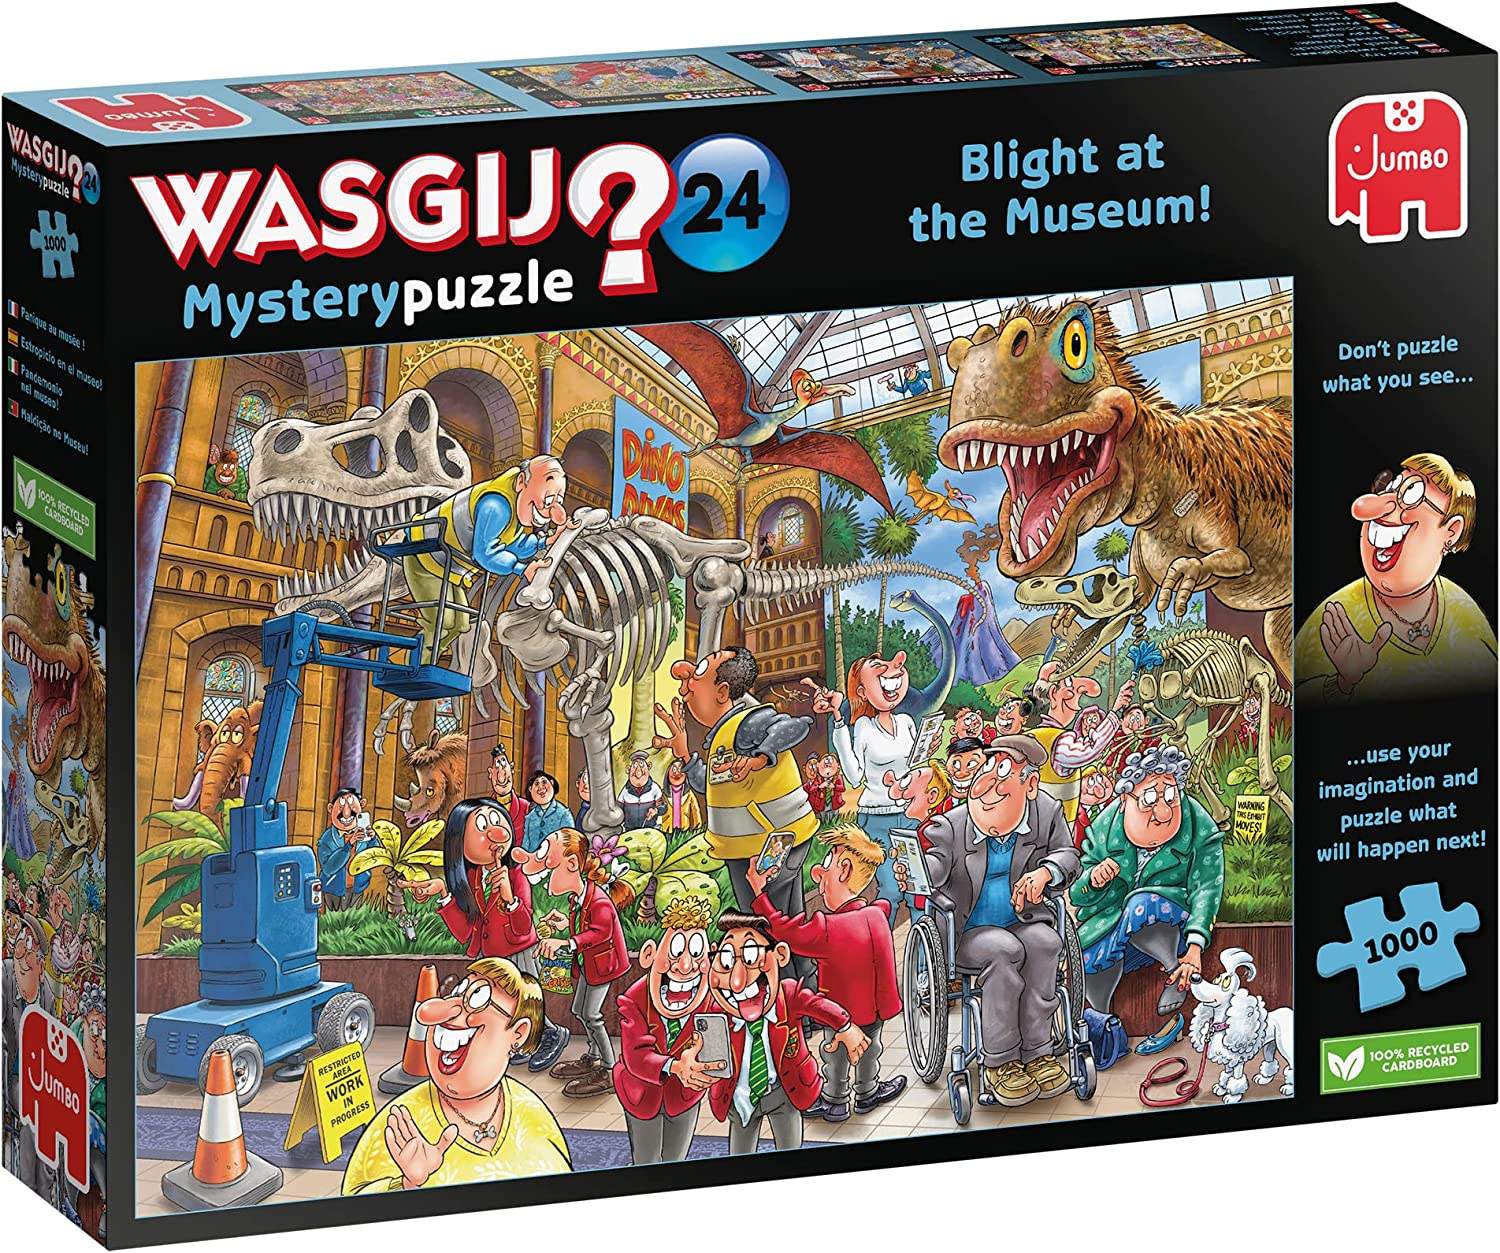 Wasgij Mystery - Blight at the Museum